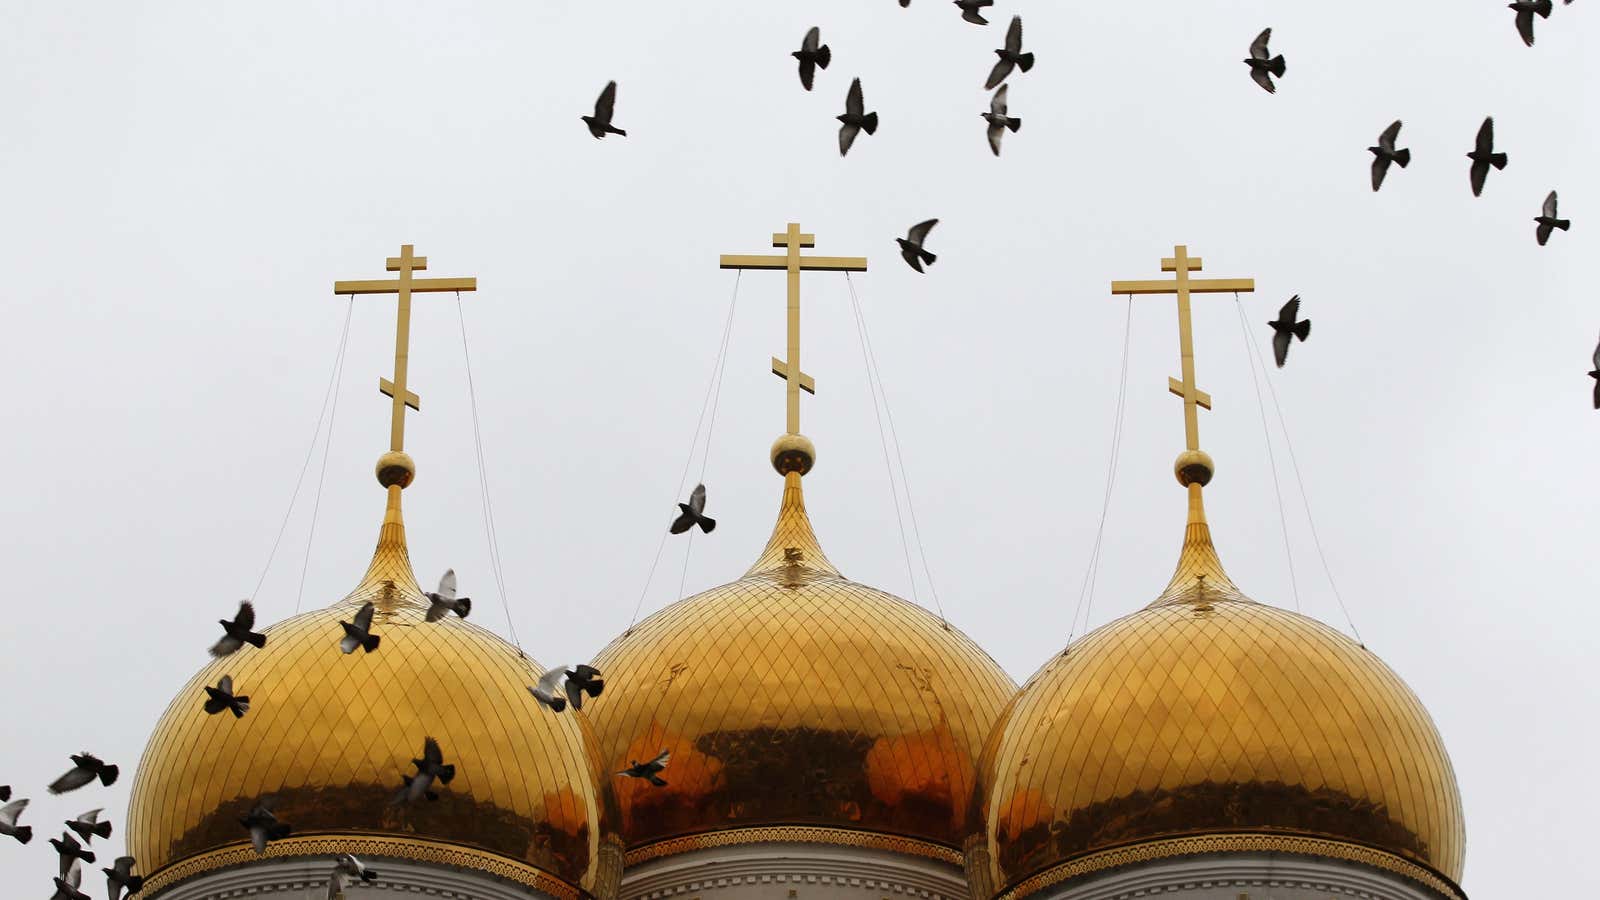 Birds fly over an Orthodox church in a monastery in the village of Nikolskoye, some 48 km (30 miles) from the eastern city of Donetsk.